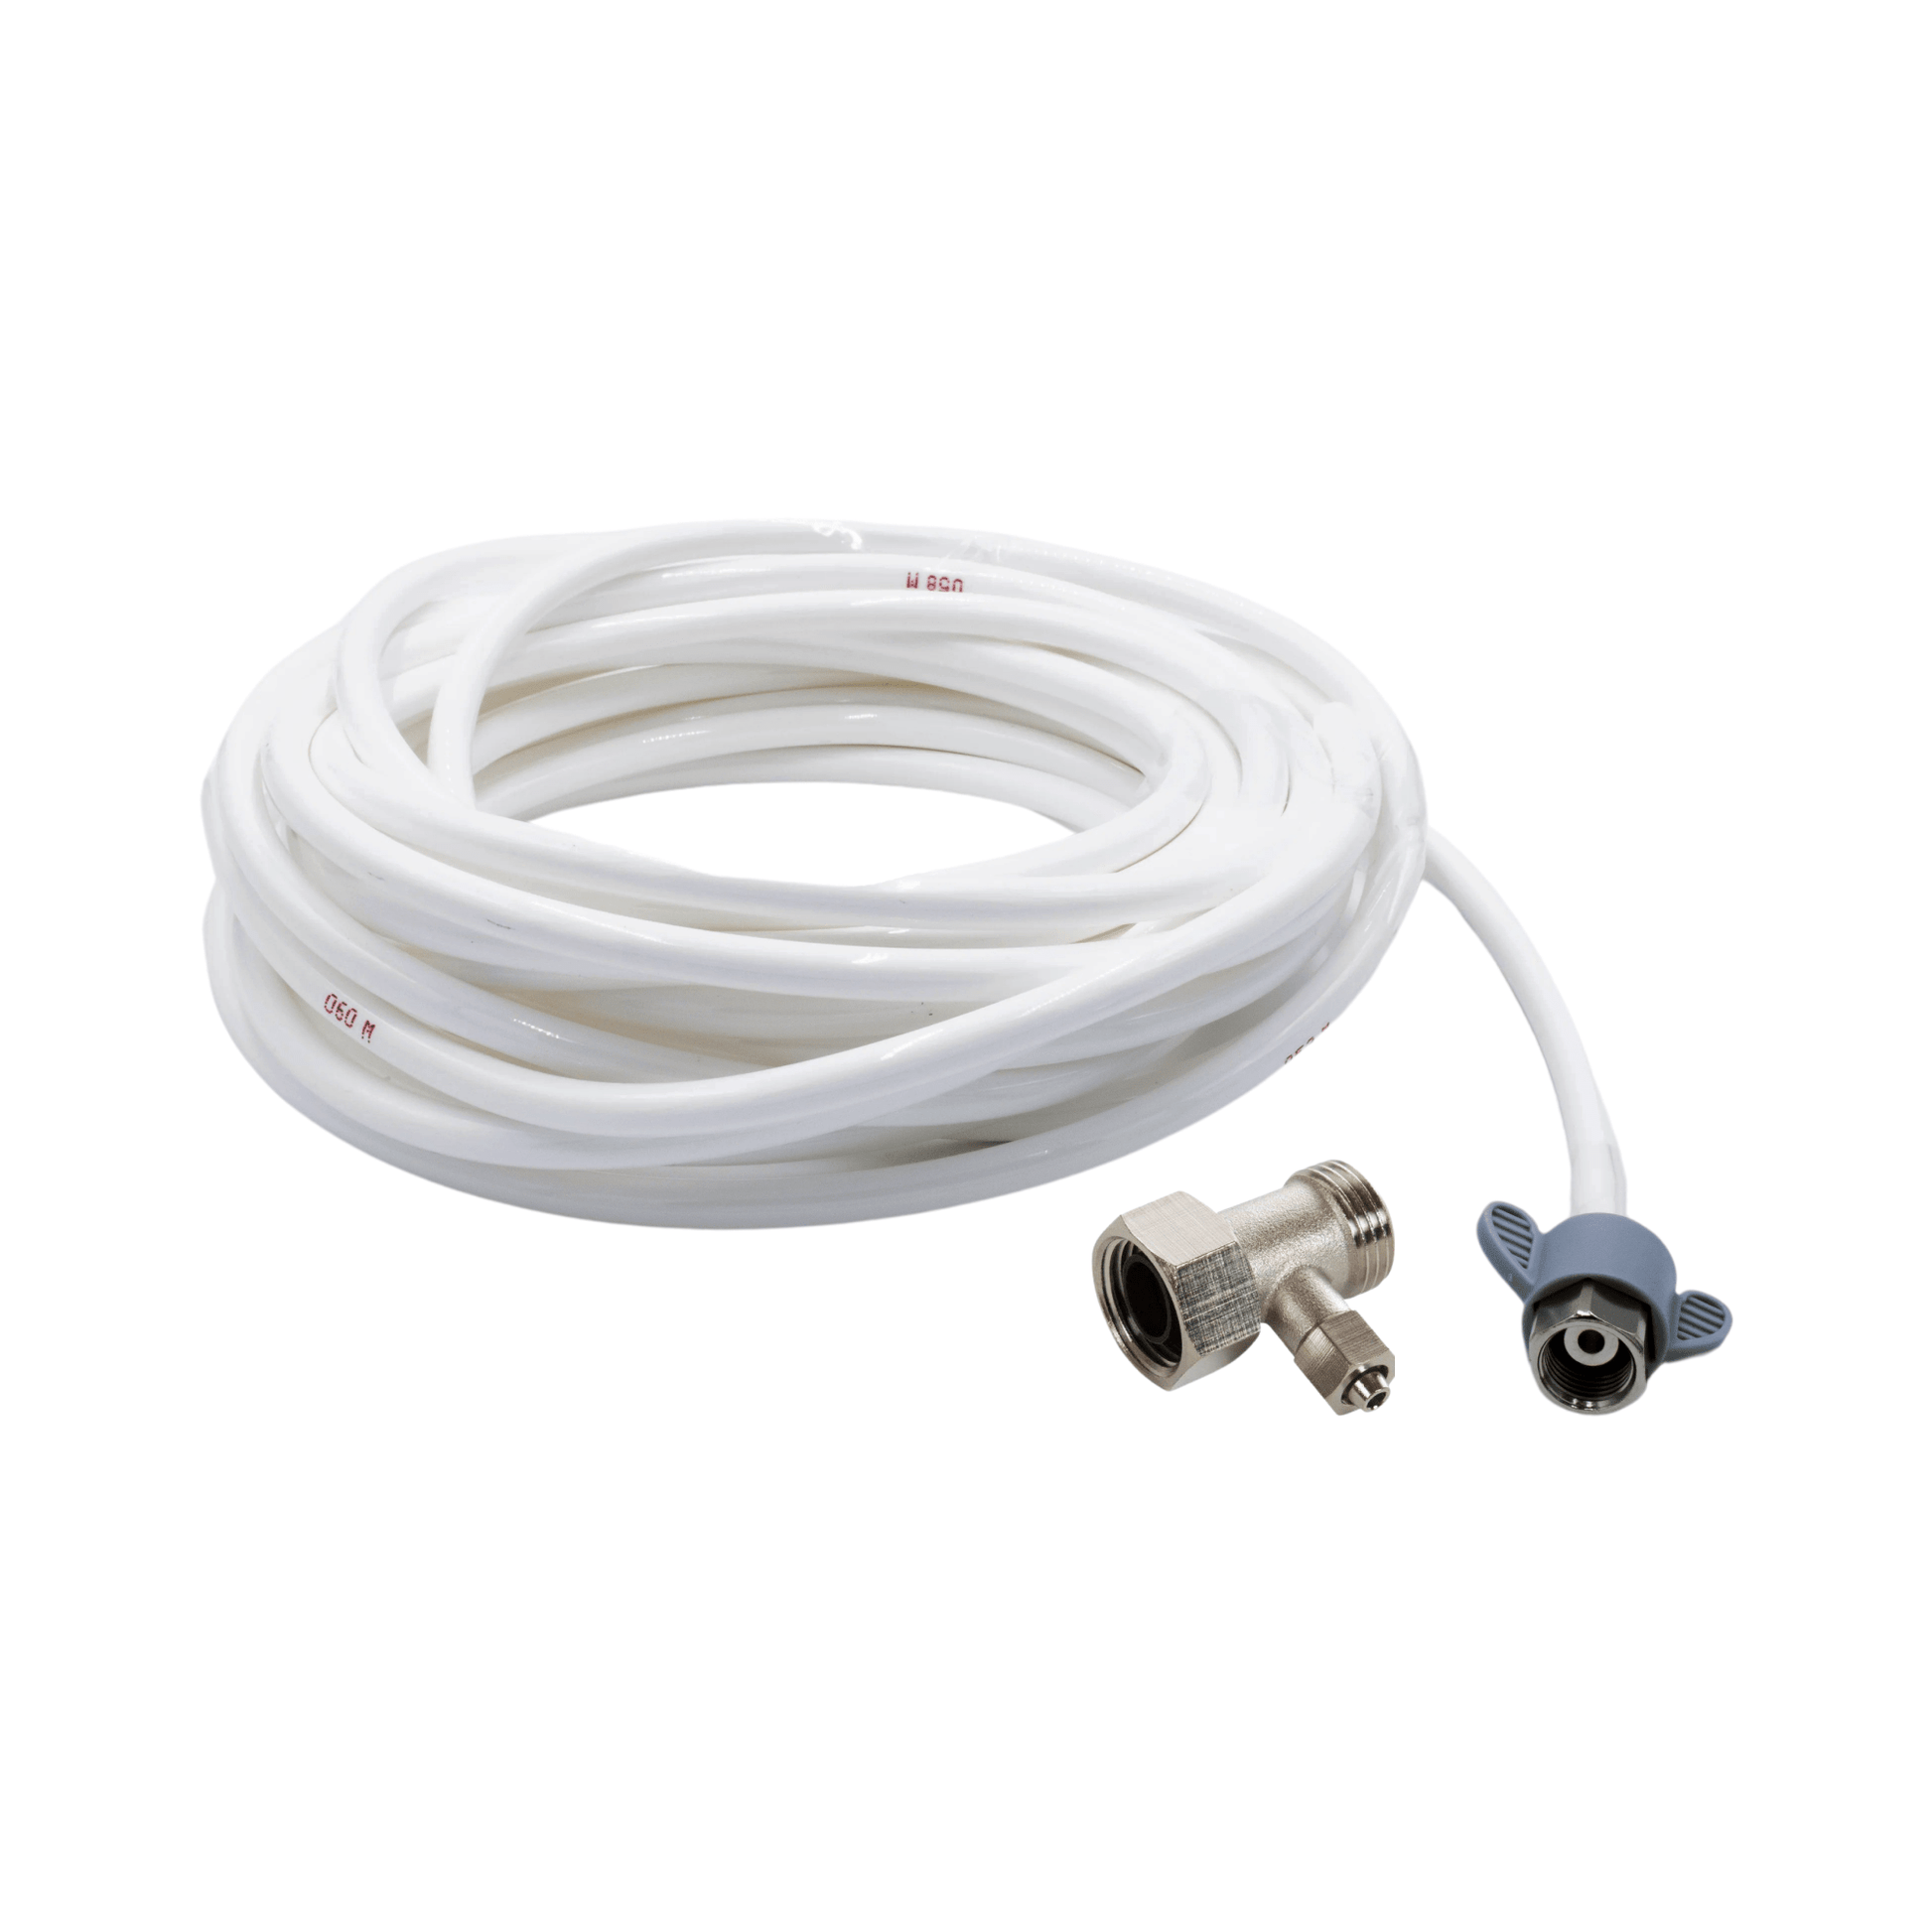 NEO Plus Accessory Kit: Alternative Installation for 1/2" Supply Valves - 32ft Plastic Bidet Hose with 1/2" Metal T-Adapter